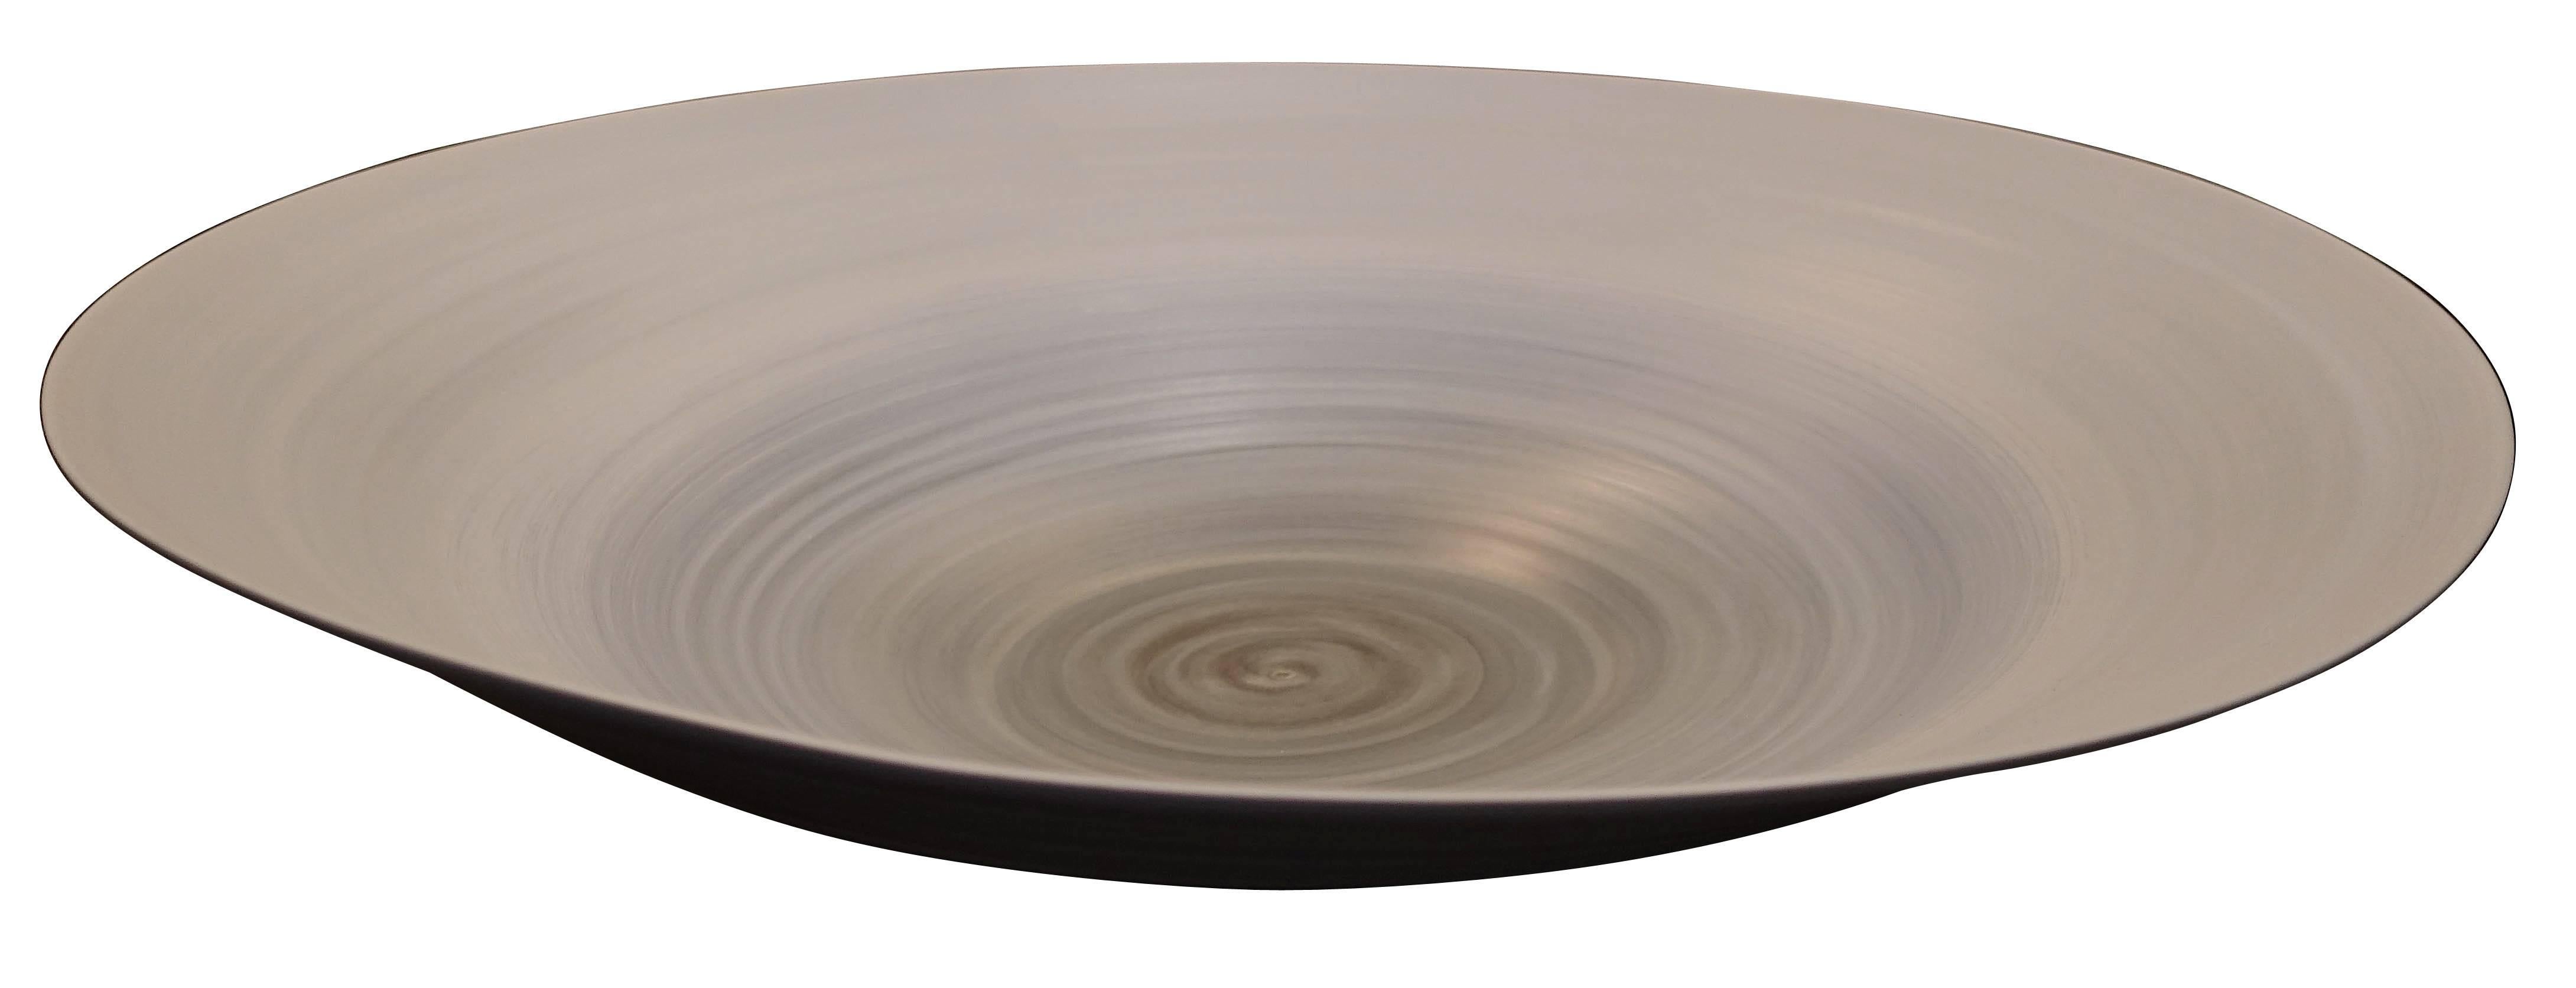 Large handcrafted fine ceramic deep bowl.
Slanted opening with an aqua ombre design.
Food safe.
 